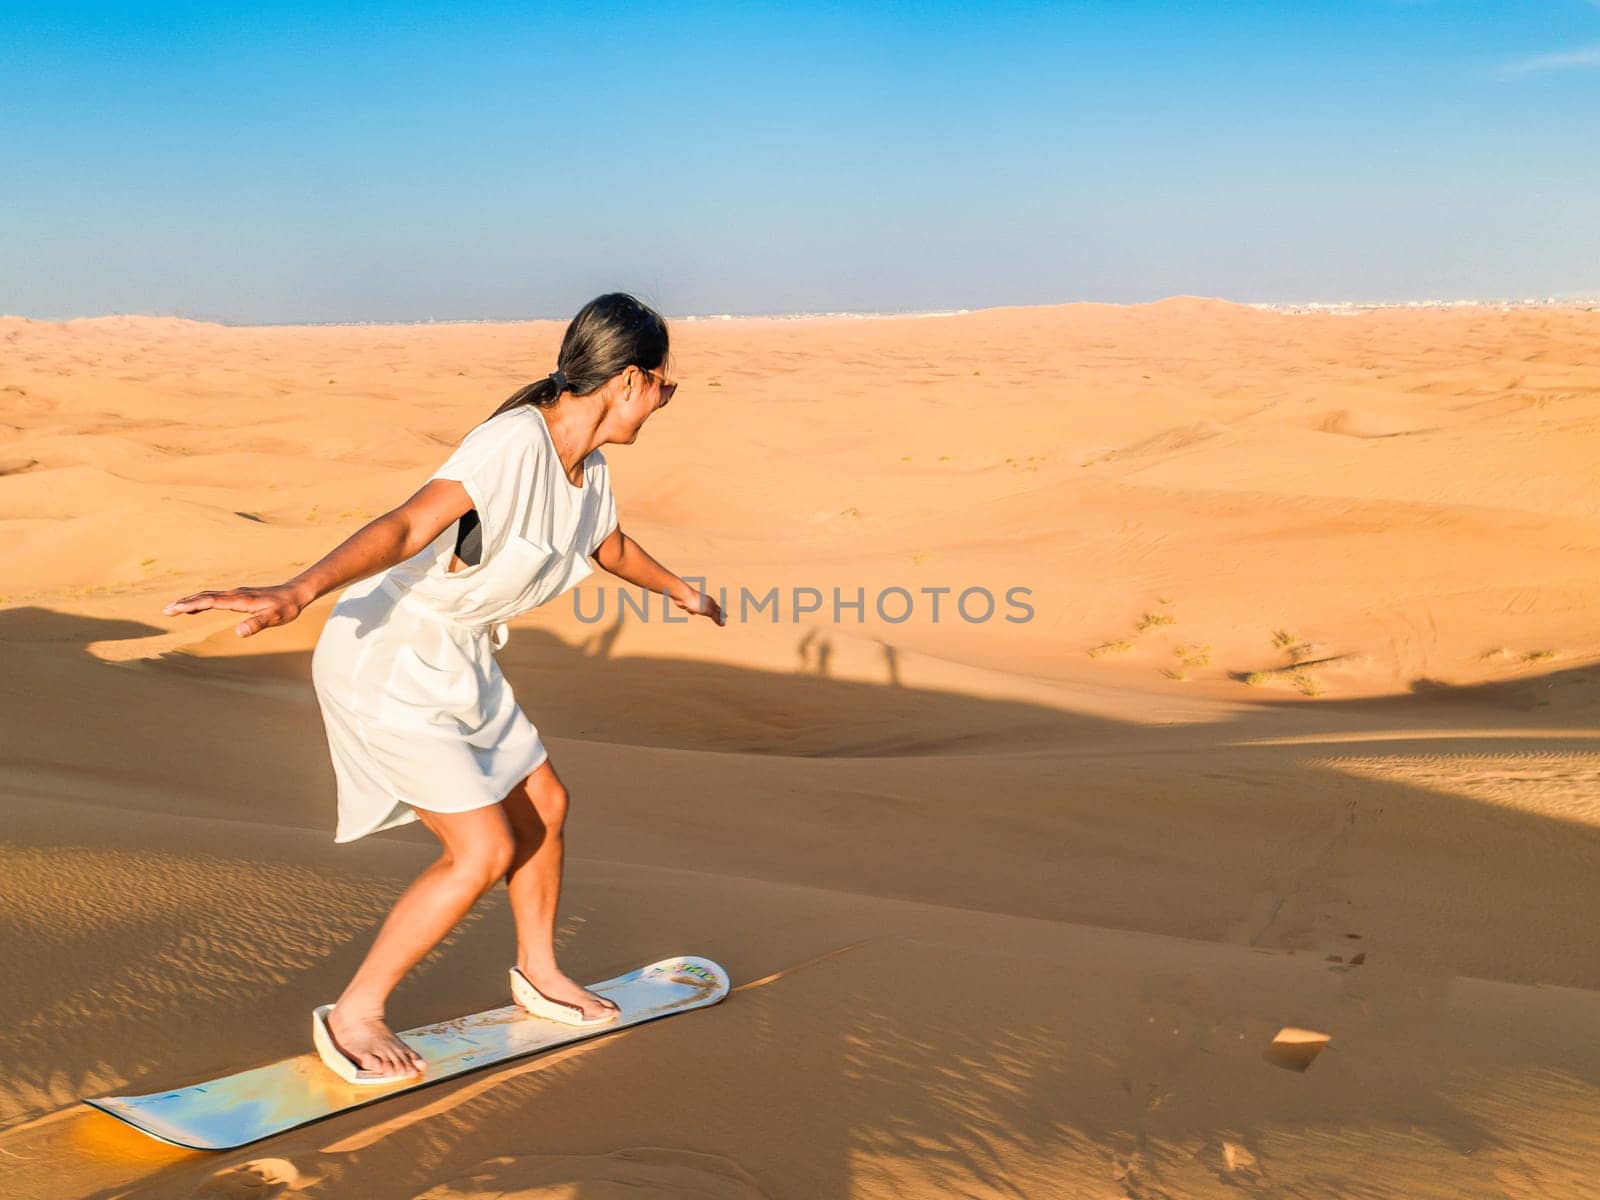 Young women sand surfing at the sand dunes of Dubai United Arab Emirates by fokkebok